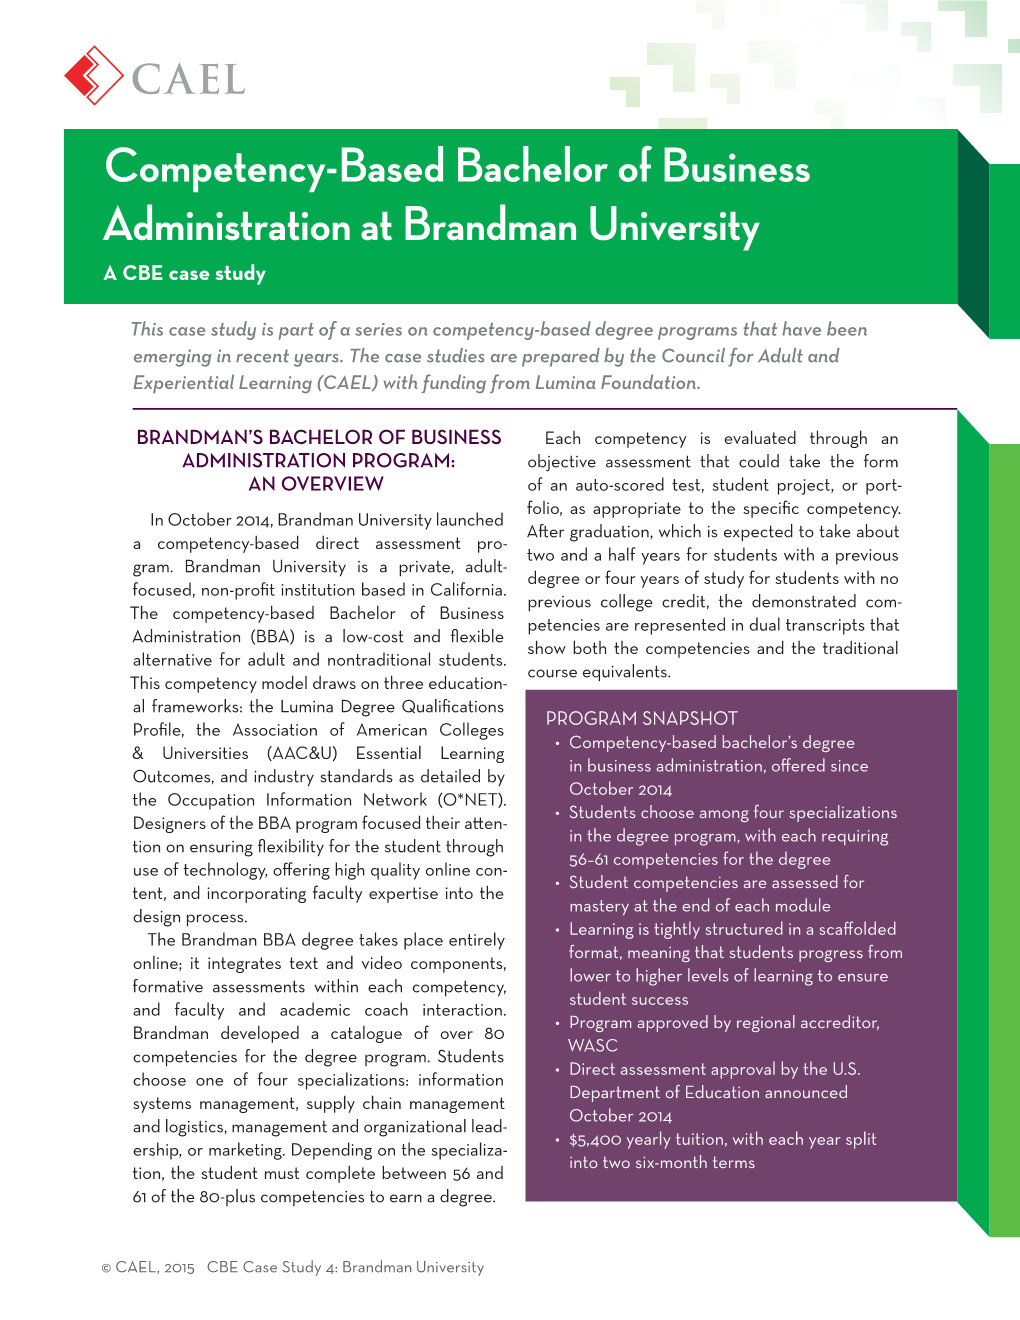 Competency-Based Bachelor of Business Administration at Brandman University a CBE Case Study